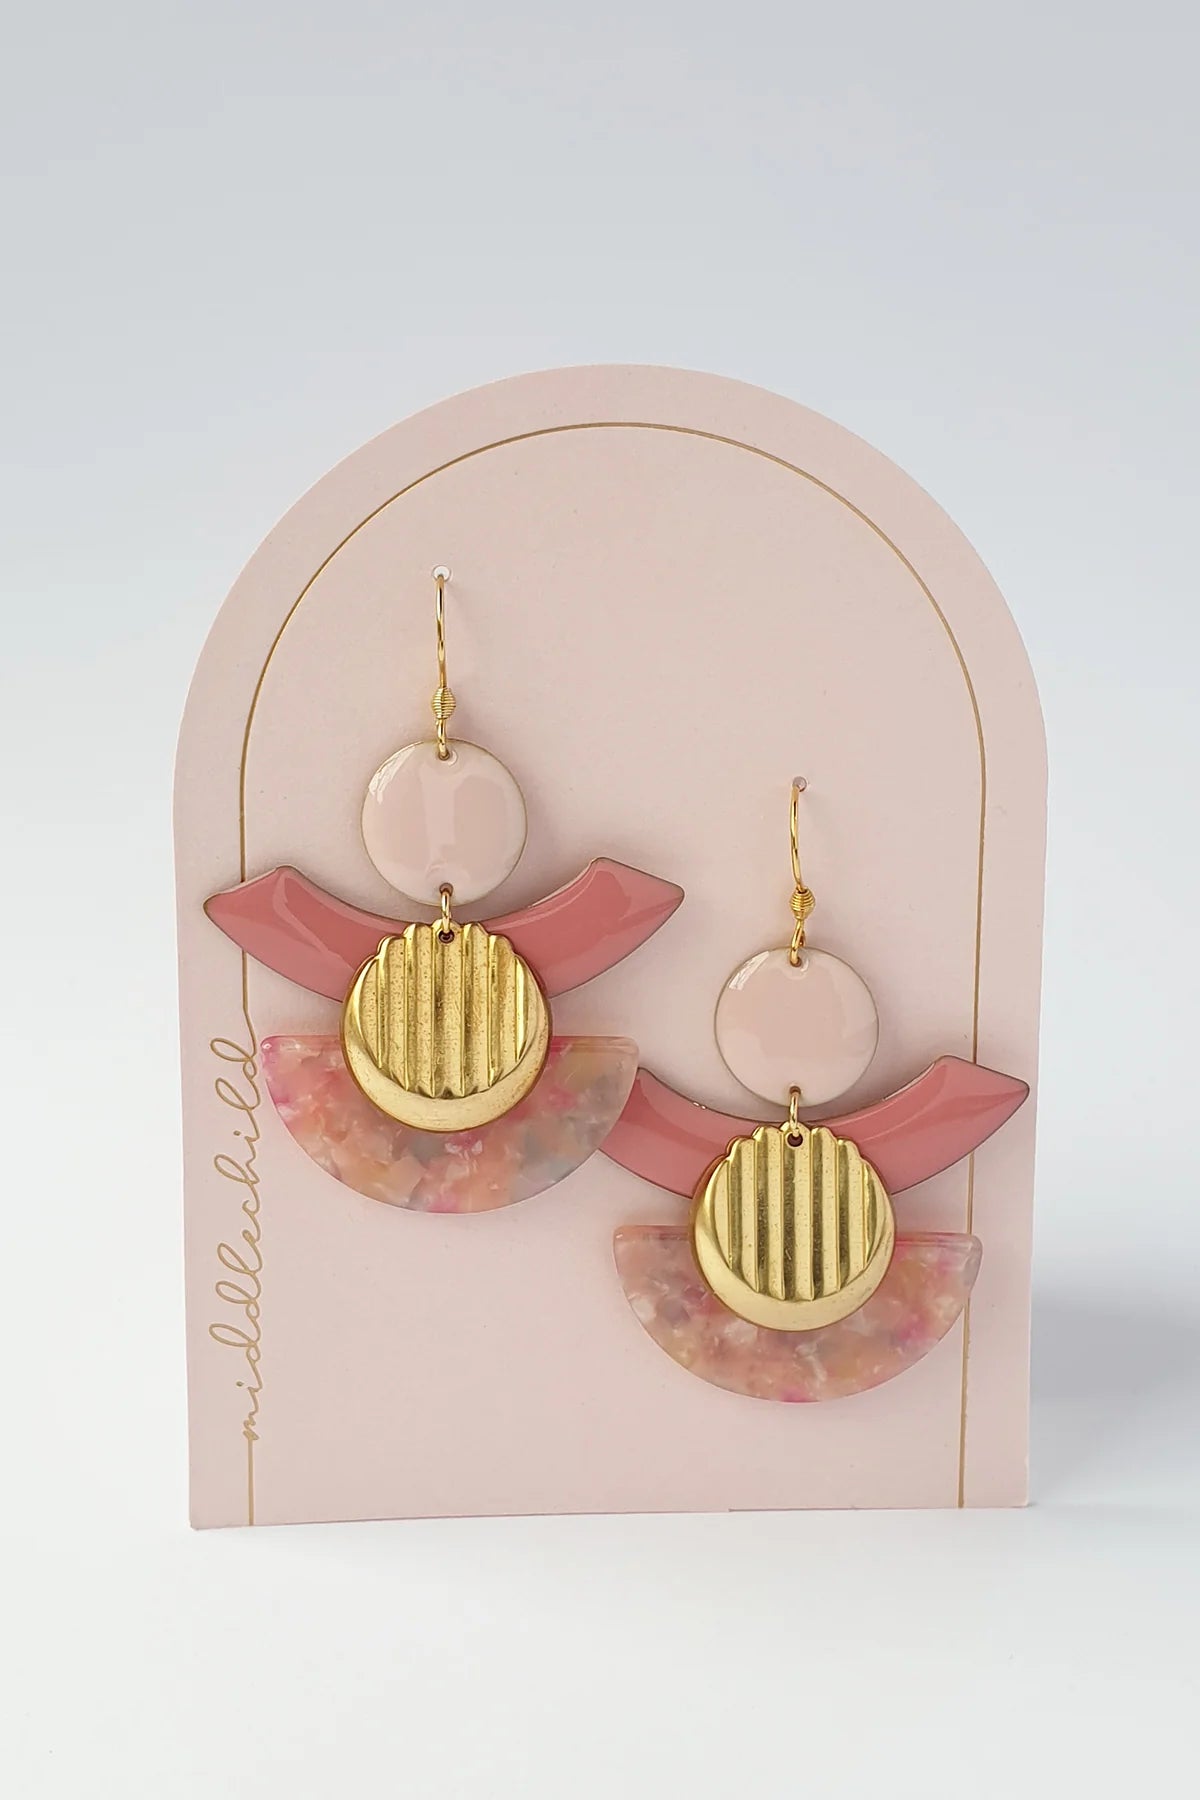 Middle Child - Manifest Earrings